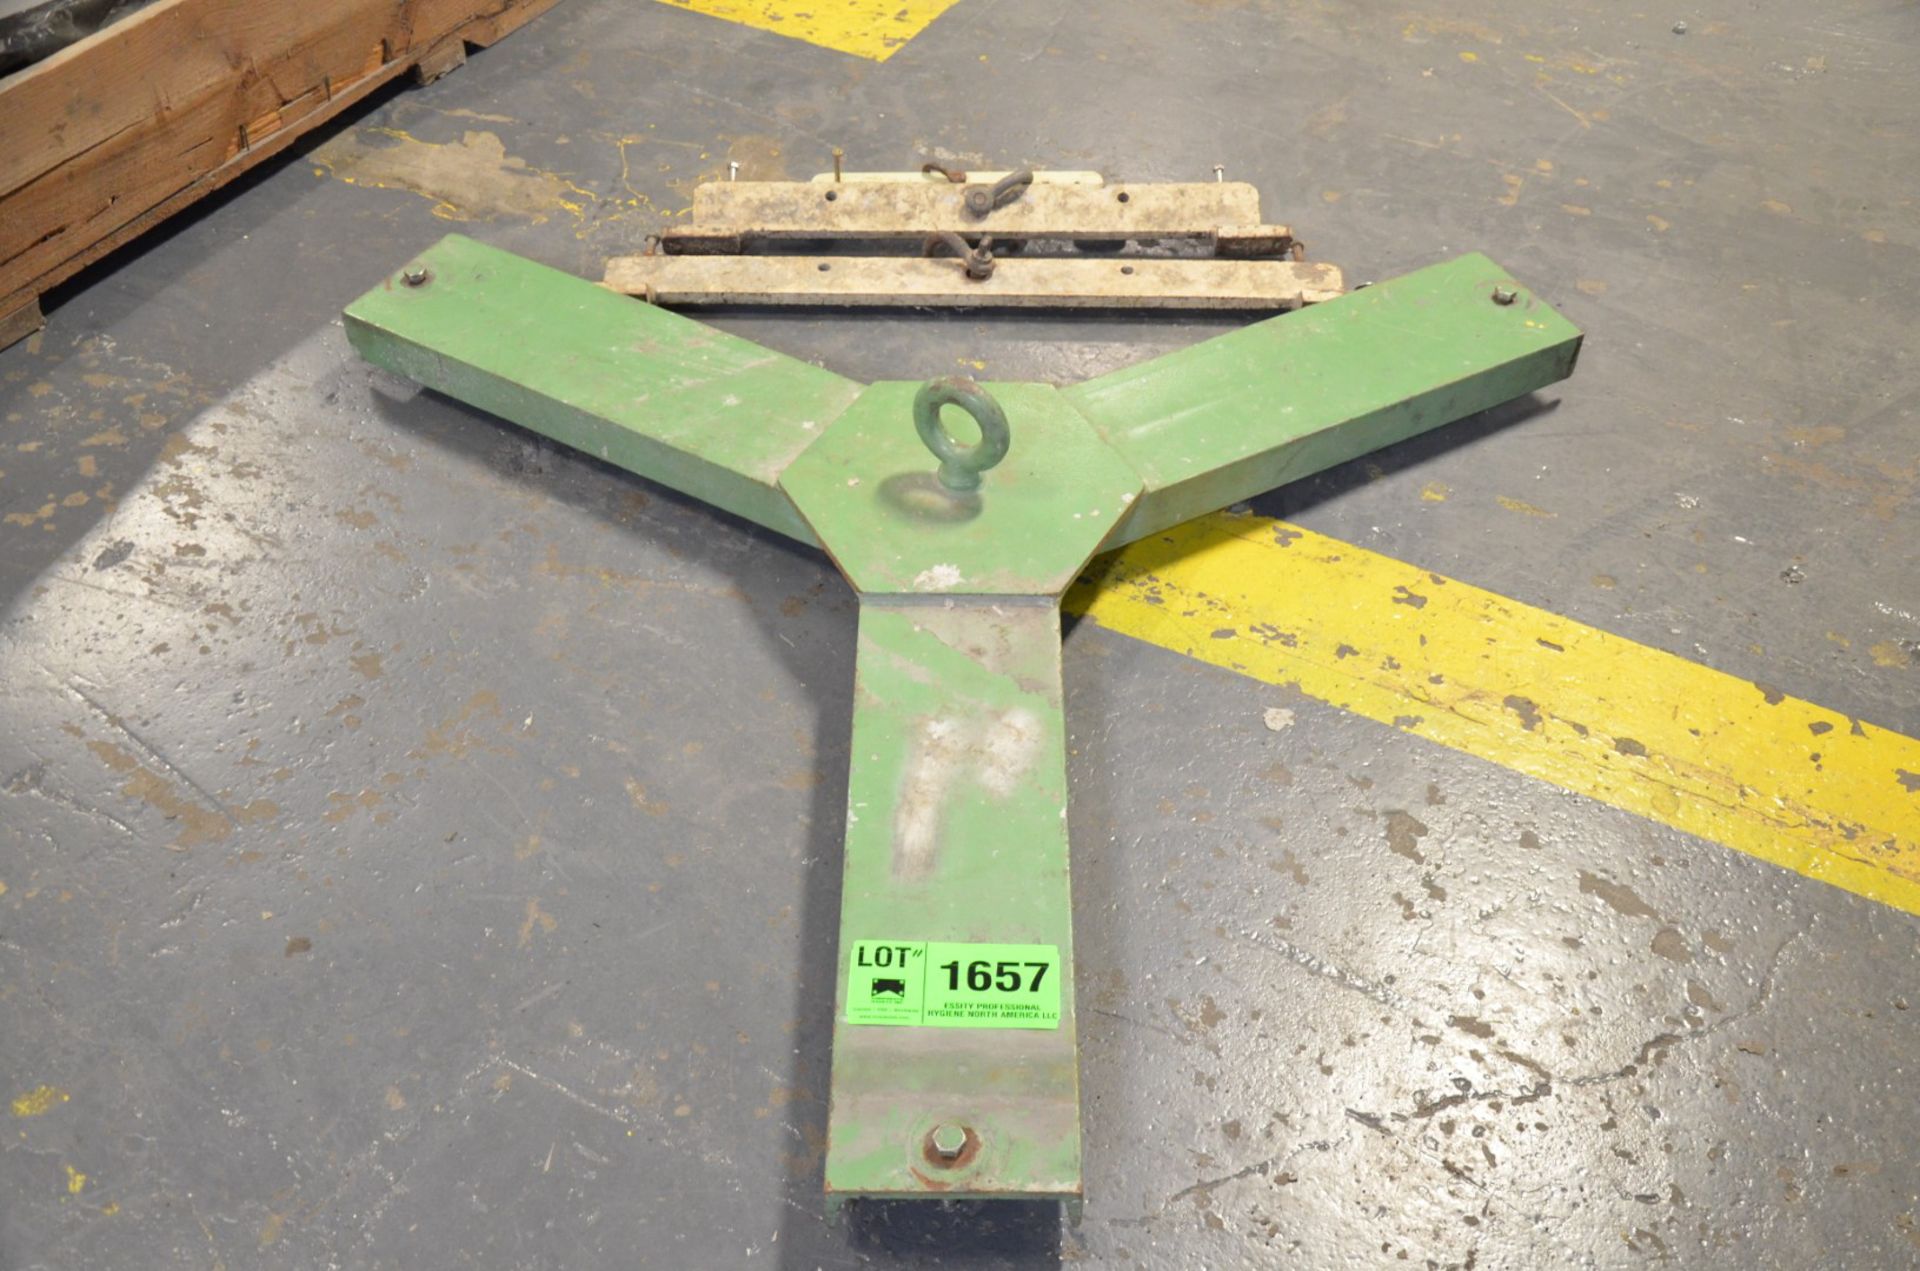 TRIPOD TYPE PRESSURE SCREEN BASKET LIFTER PULLER [RIGGING FEE FOR LOT #1657 - $25 USD PLUS